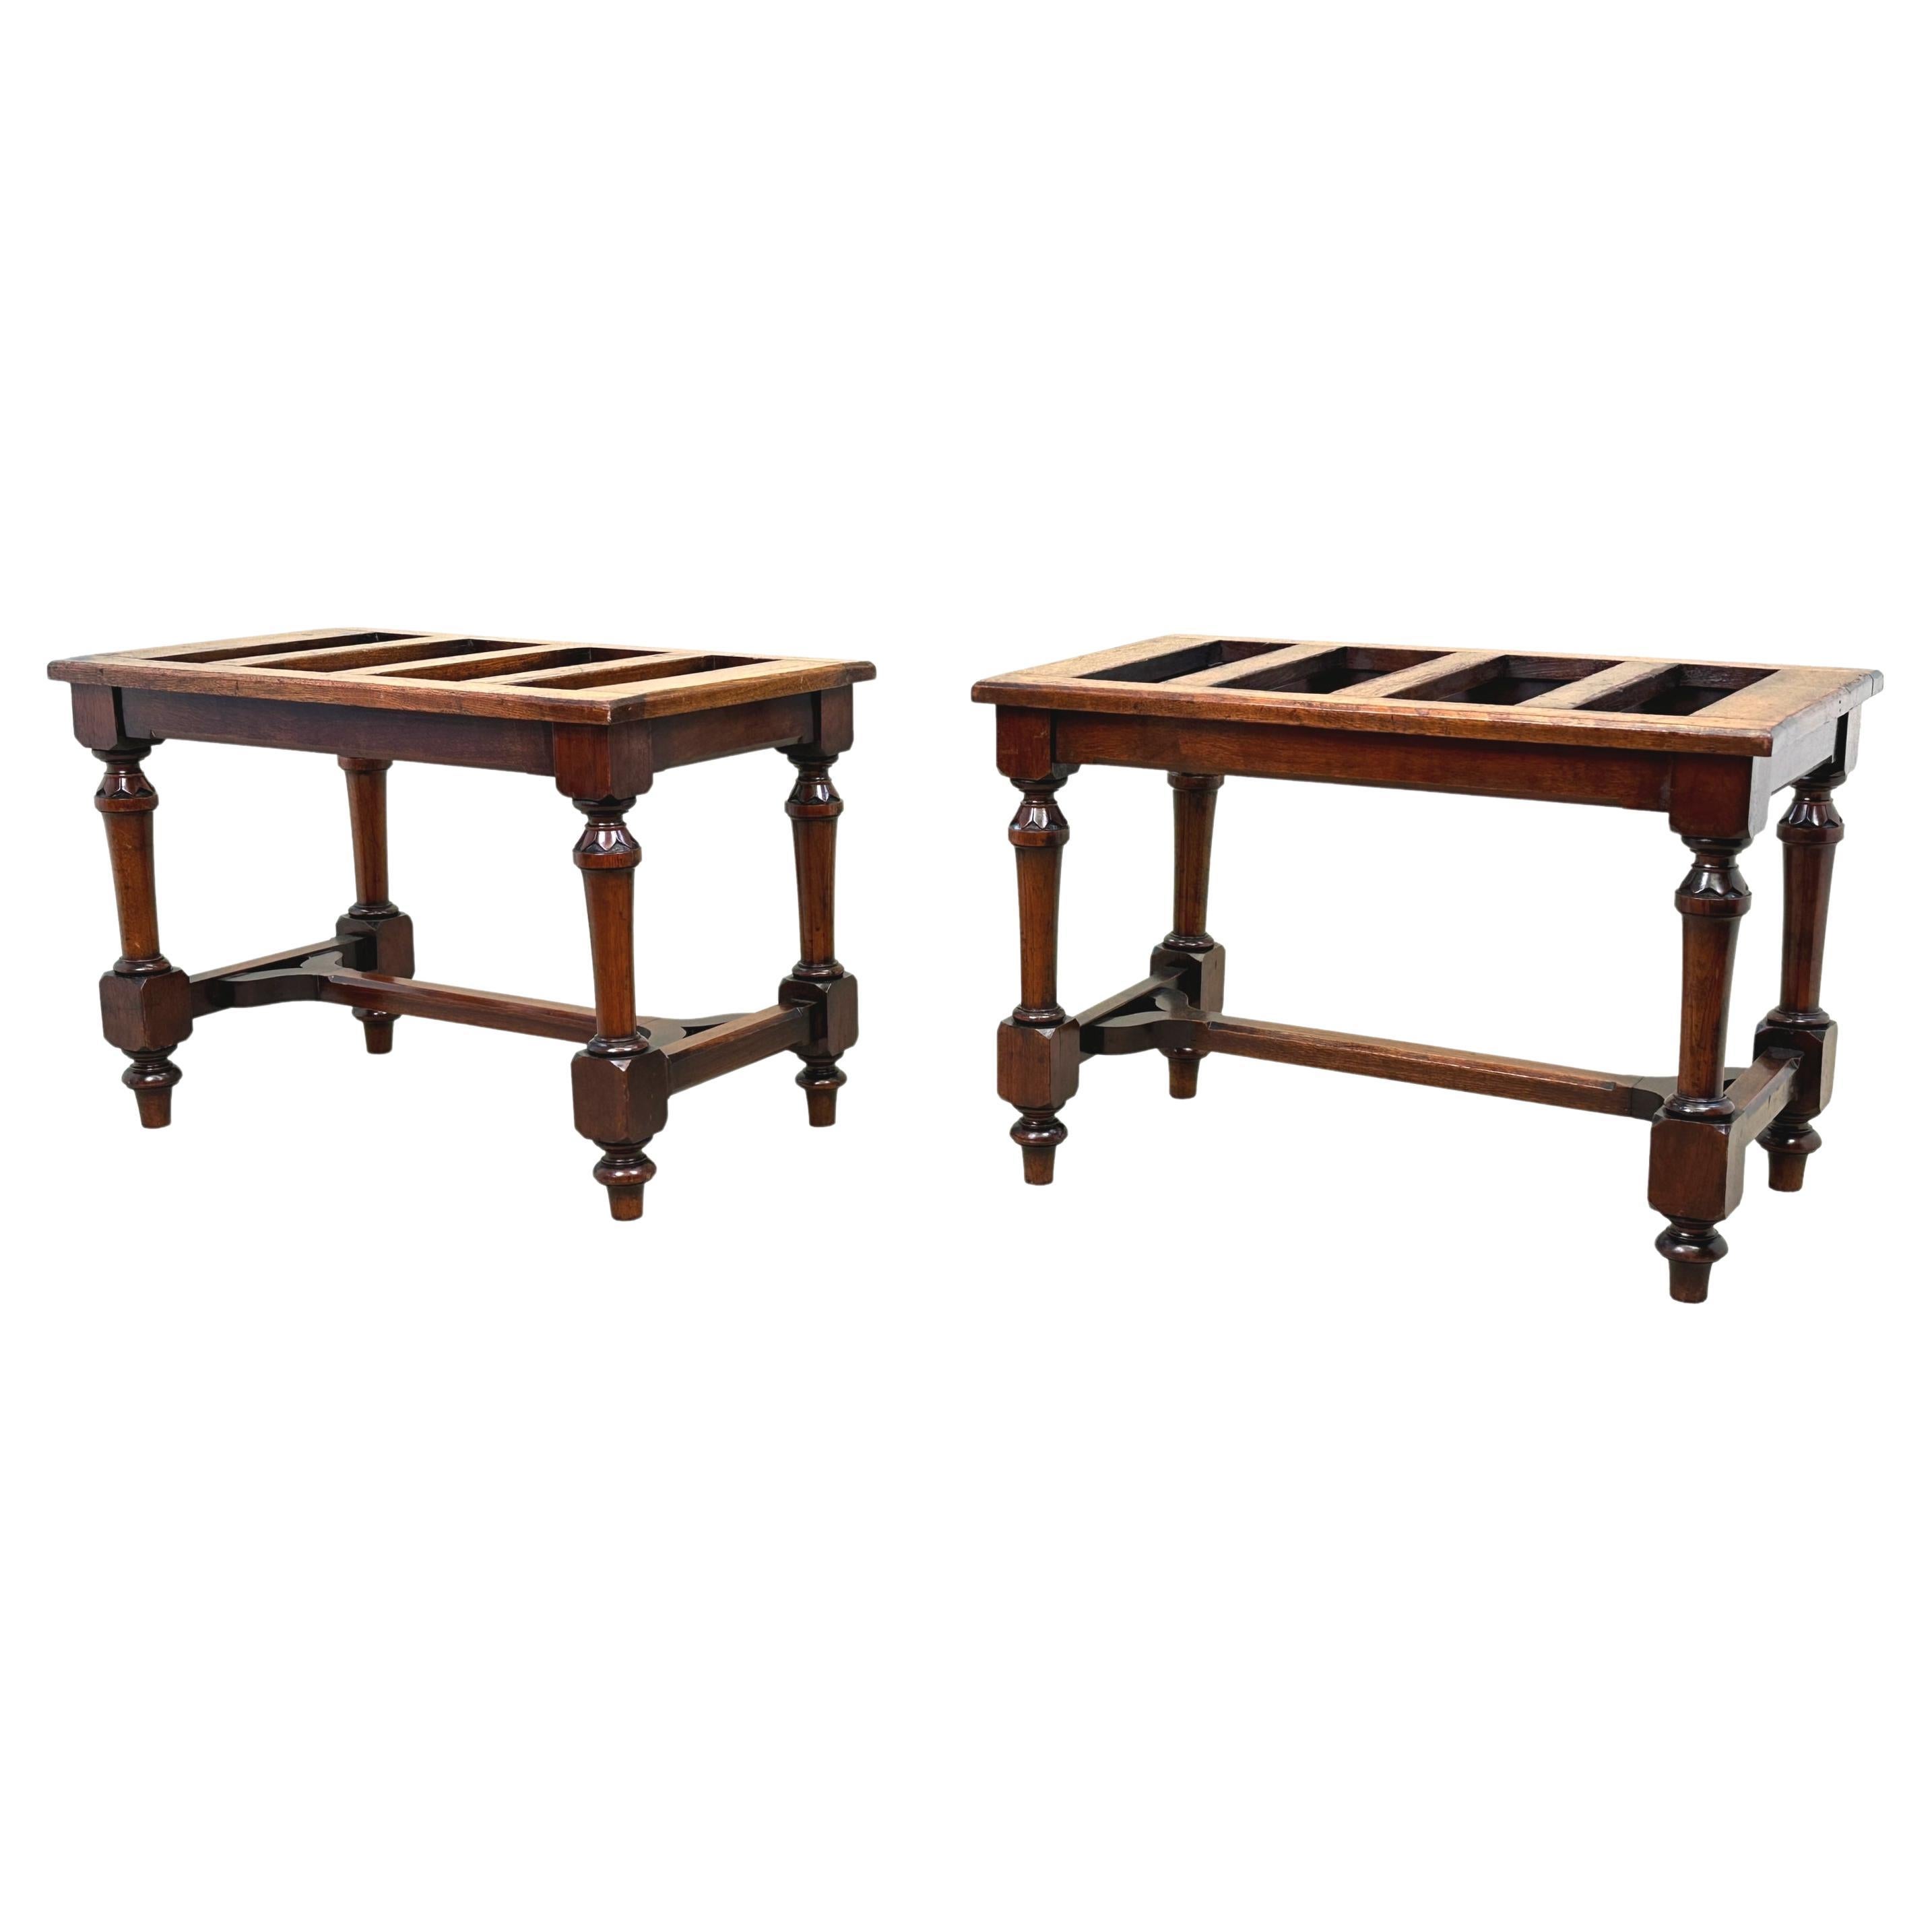 Pair Of 19th Century Walnut Luggage Rack Stands